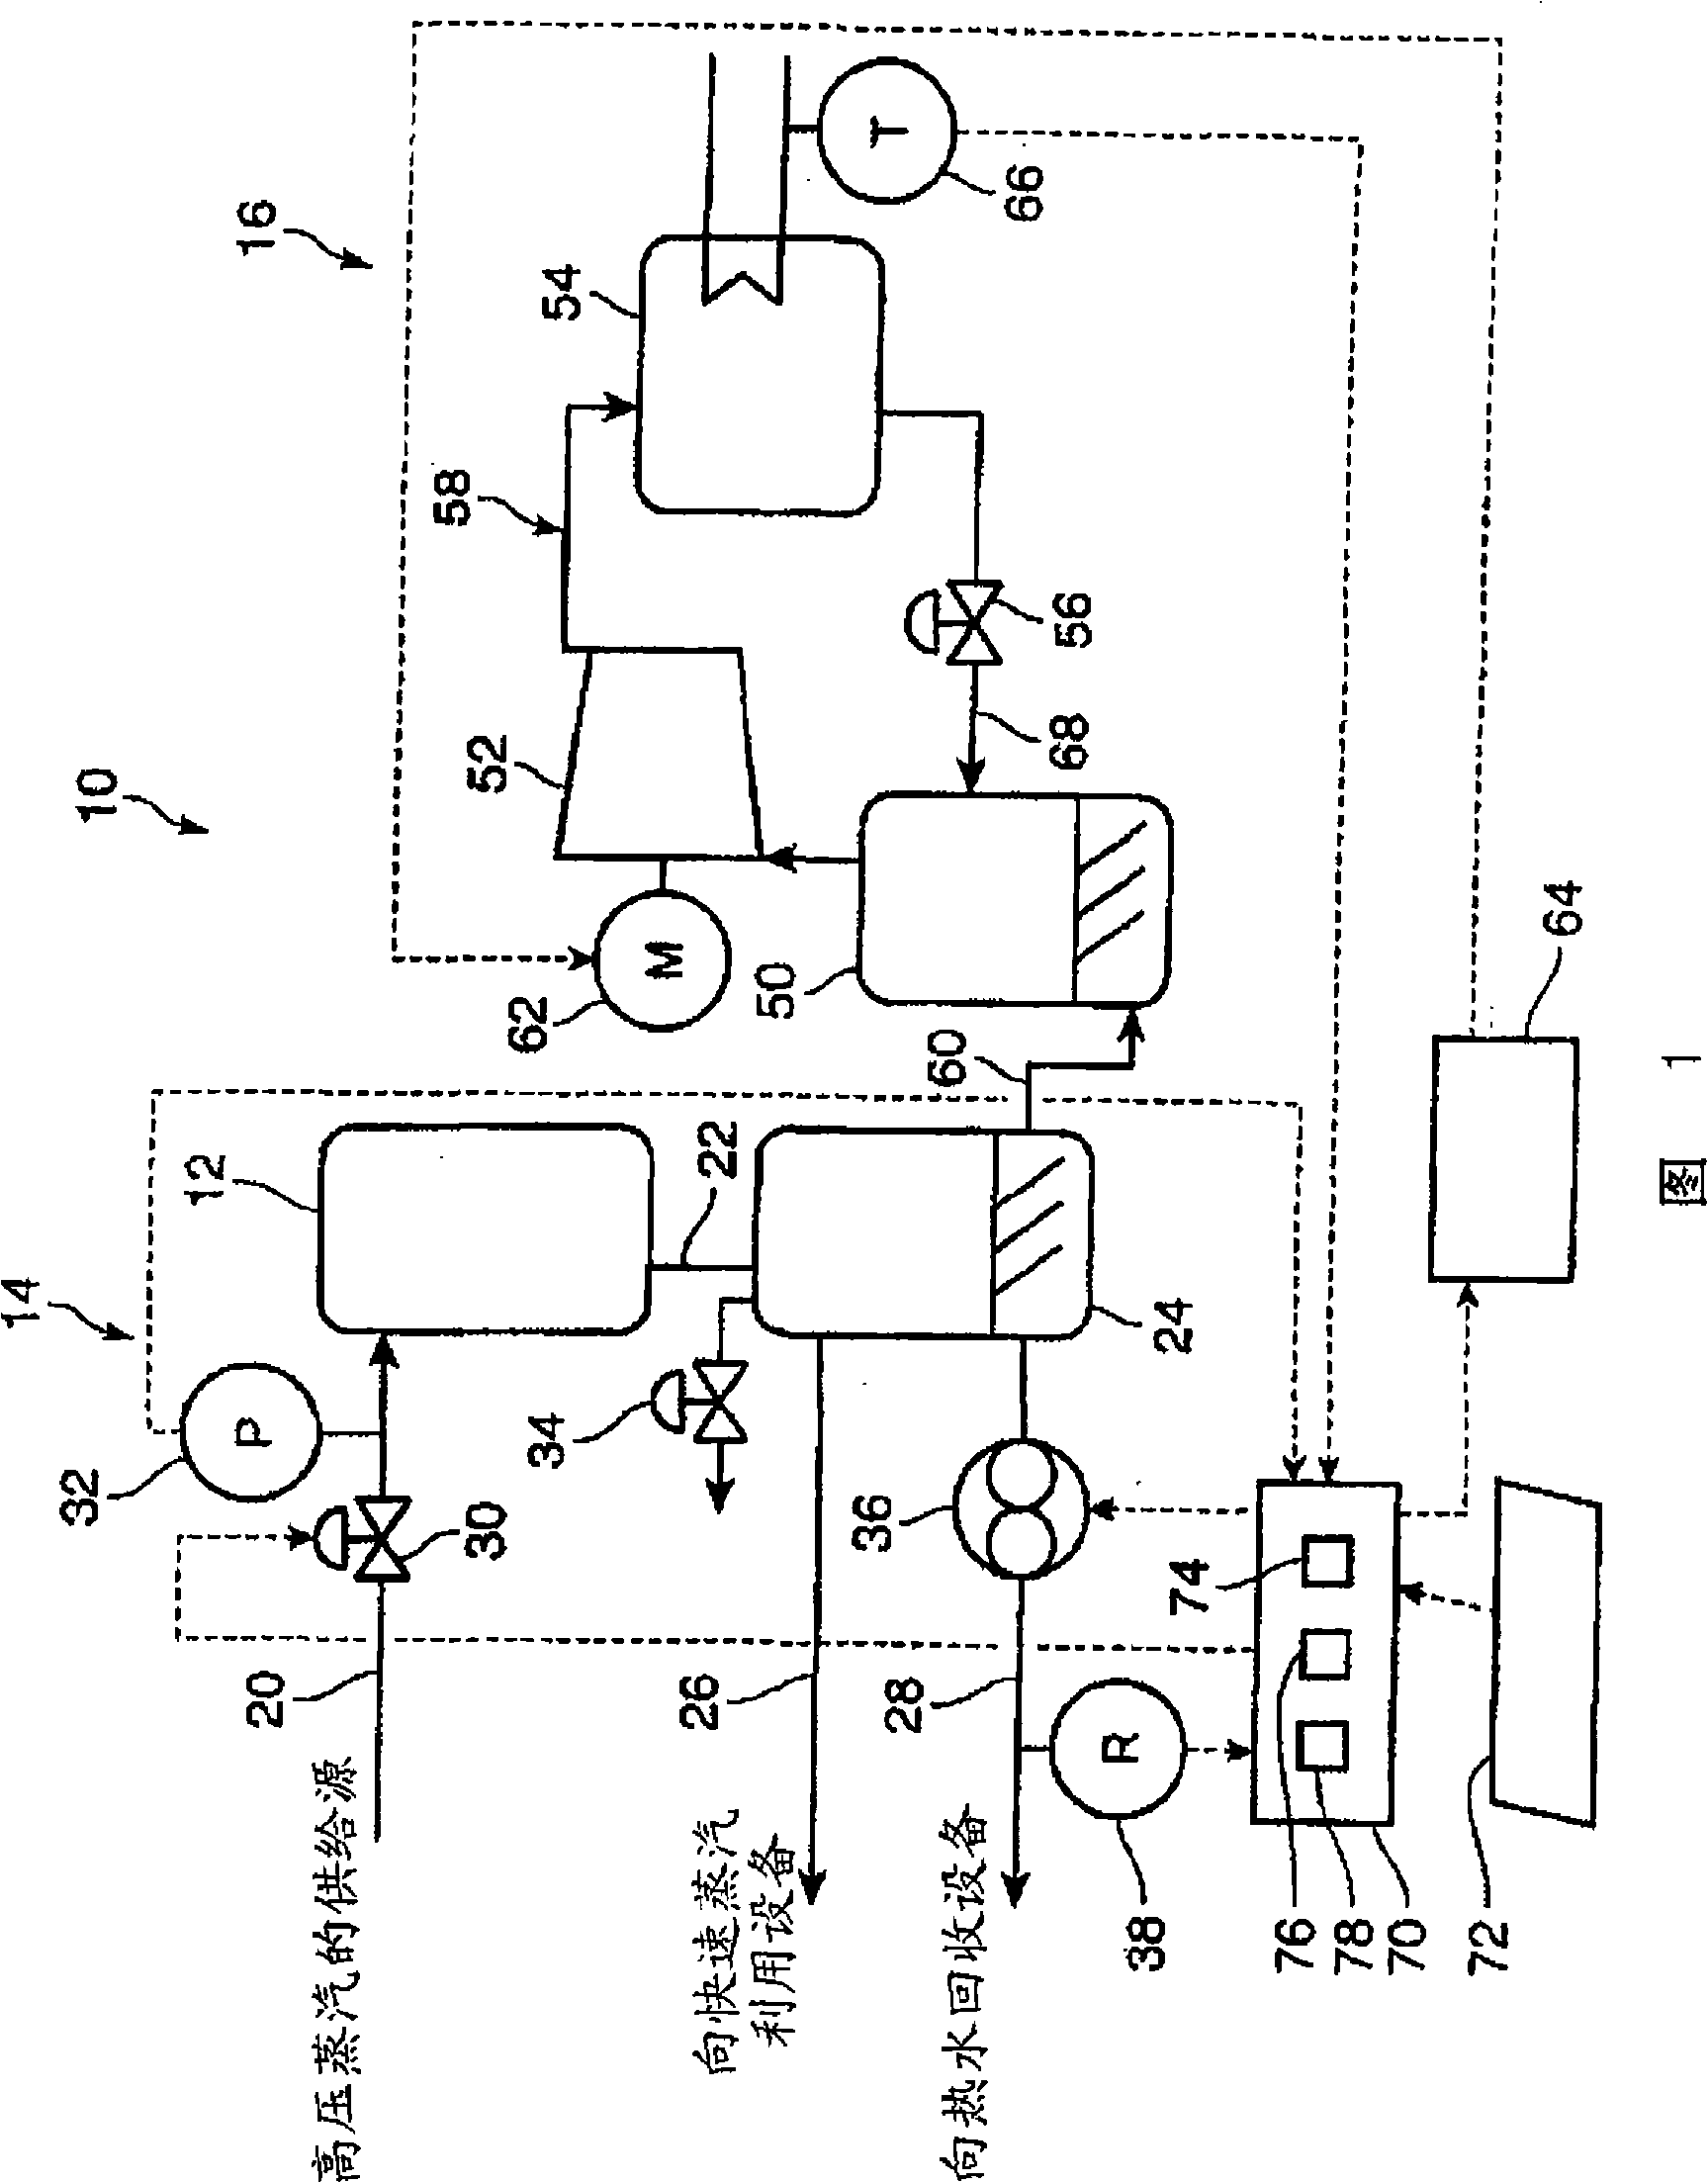 Thermal water utilization device and steam treatment device